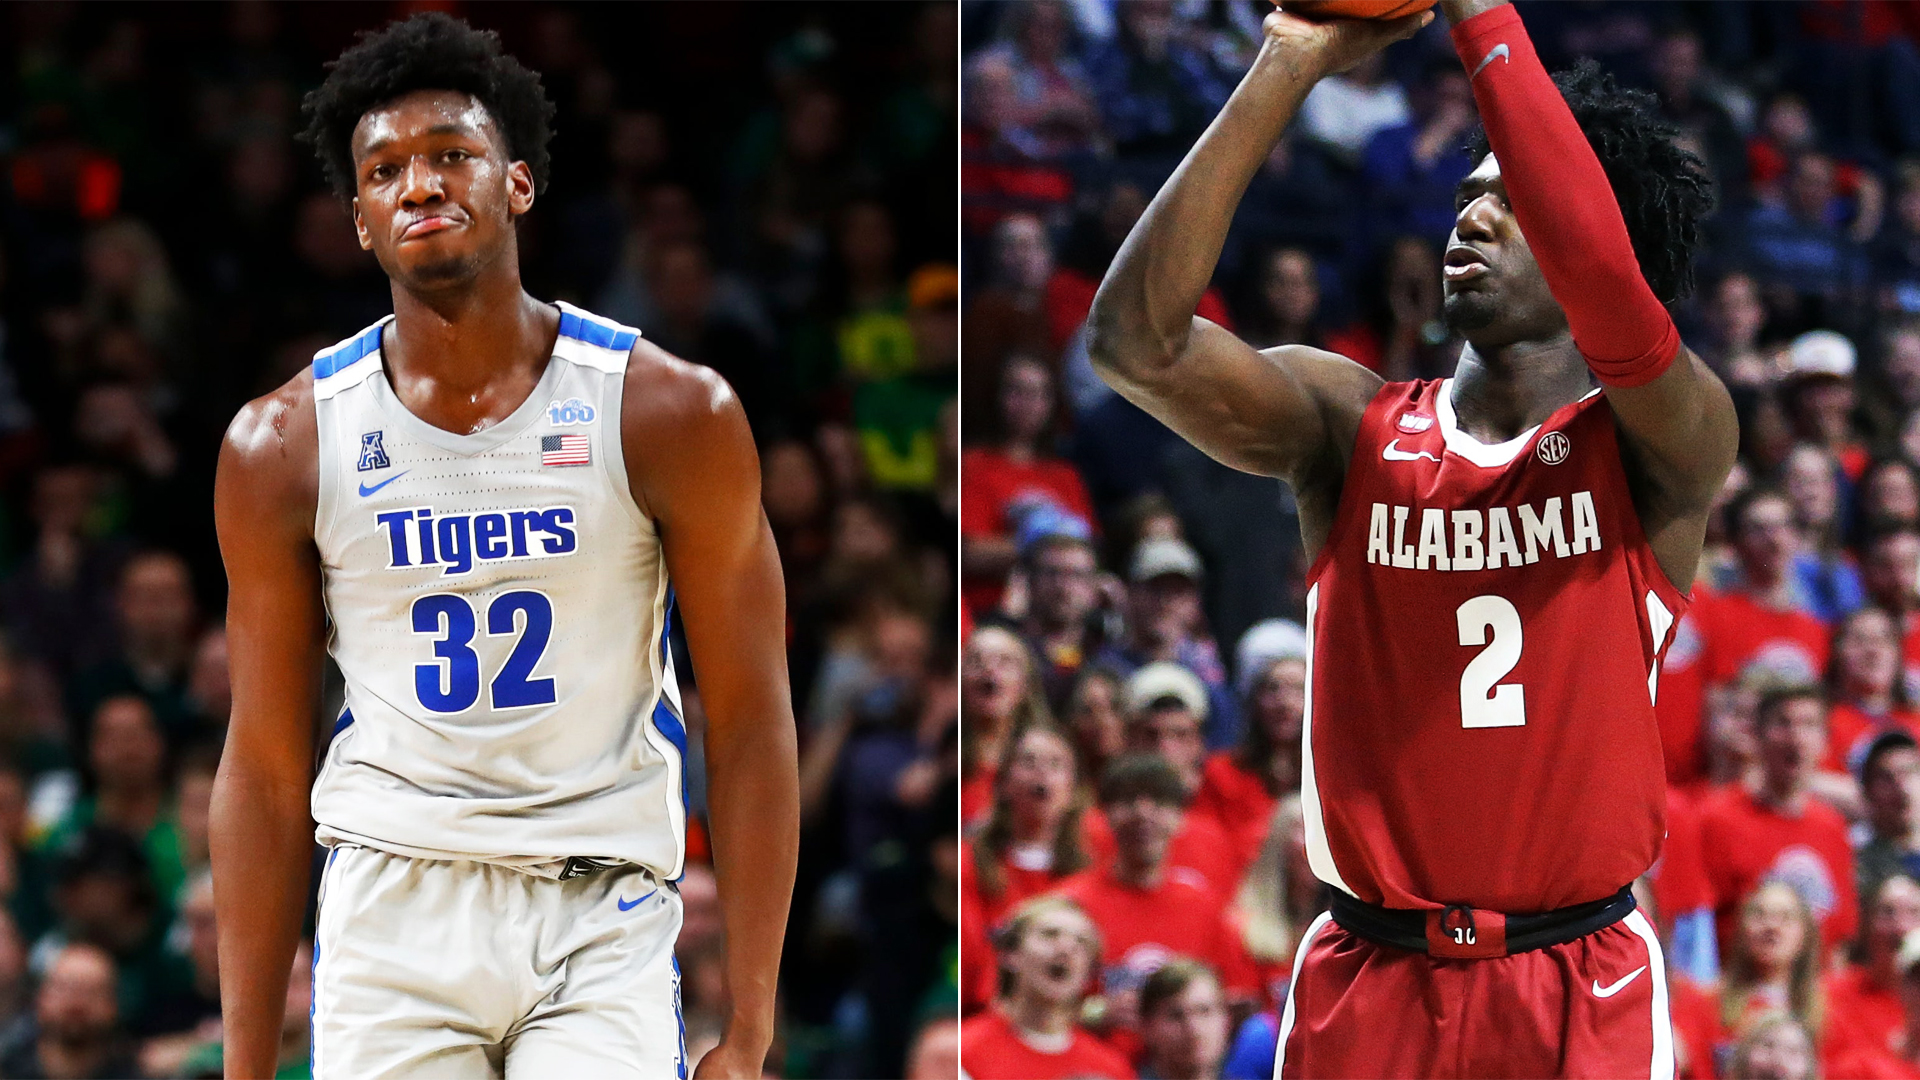 48 HQ Pictures Nba Draft Projections 2020 Espn / NBA Mock Draft 2018: ESPN projection for all 60 picks - A ...